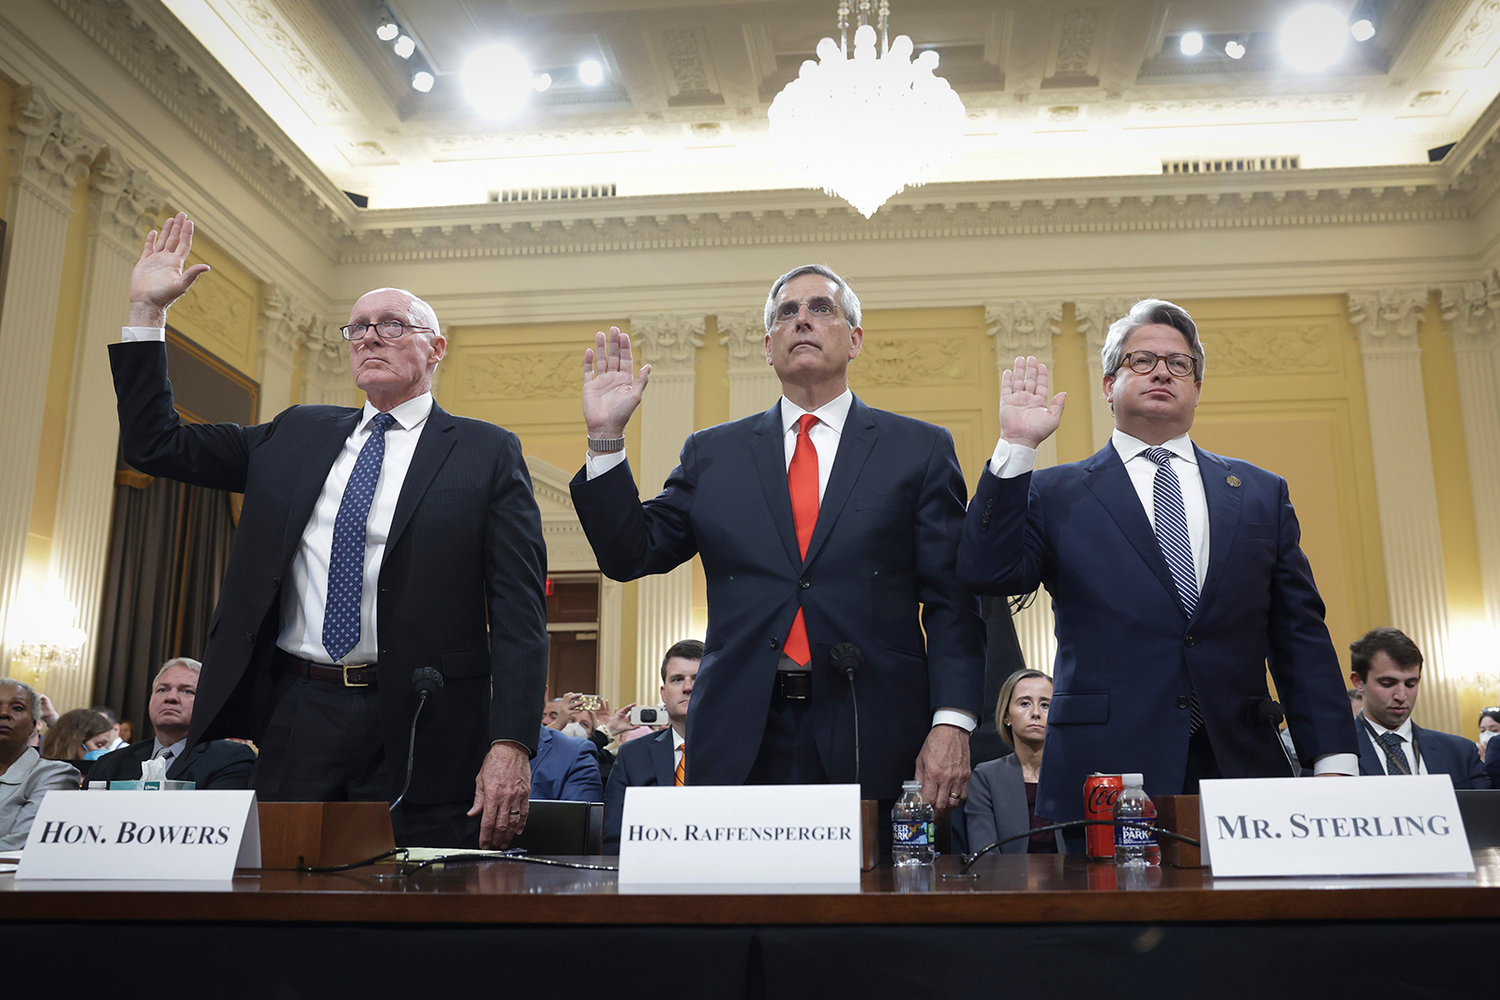 From left to right: Rusty Bowers, Arizona House speaker; Brad Raffensperger, Georgia secretary of state; and Gabriel Sterling, Georgia secretary of state chief operating officer, are sworn in prior to testifying during the fourth hearing on the Jan. 6 investigation in the Cannon House Office Building on June 21, 2022, in Washington, D.C. The bipartisan committee, which has been gathering evidence for almost a year related to the Jan. 6 attack at the U.S. Capitol, is presenting its findings in a series of televised hearings. (Kevin Dietsch/Getty Images/TNS)